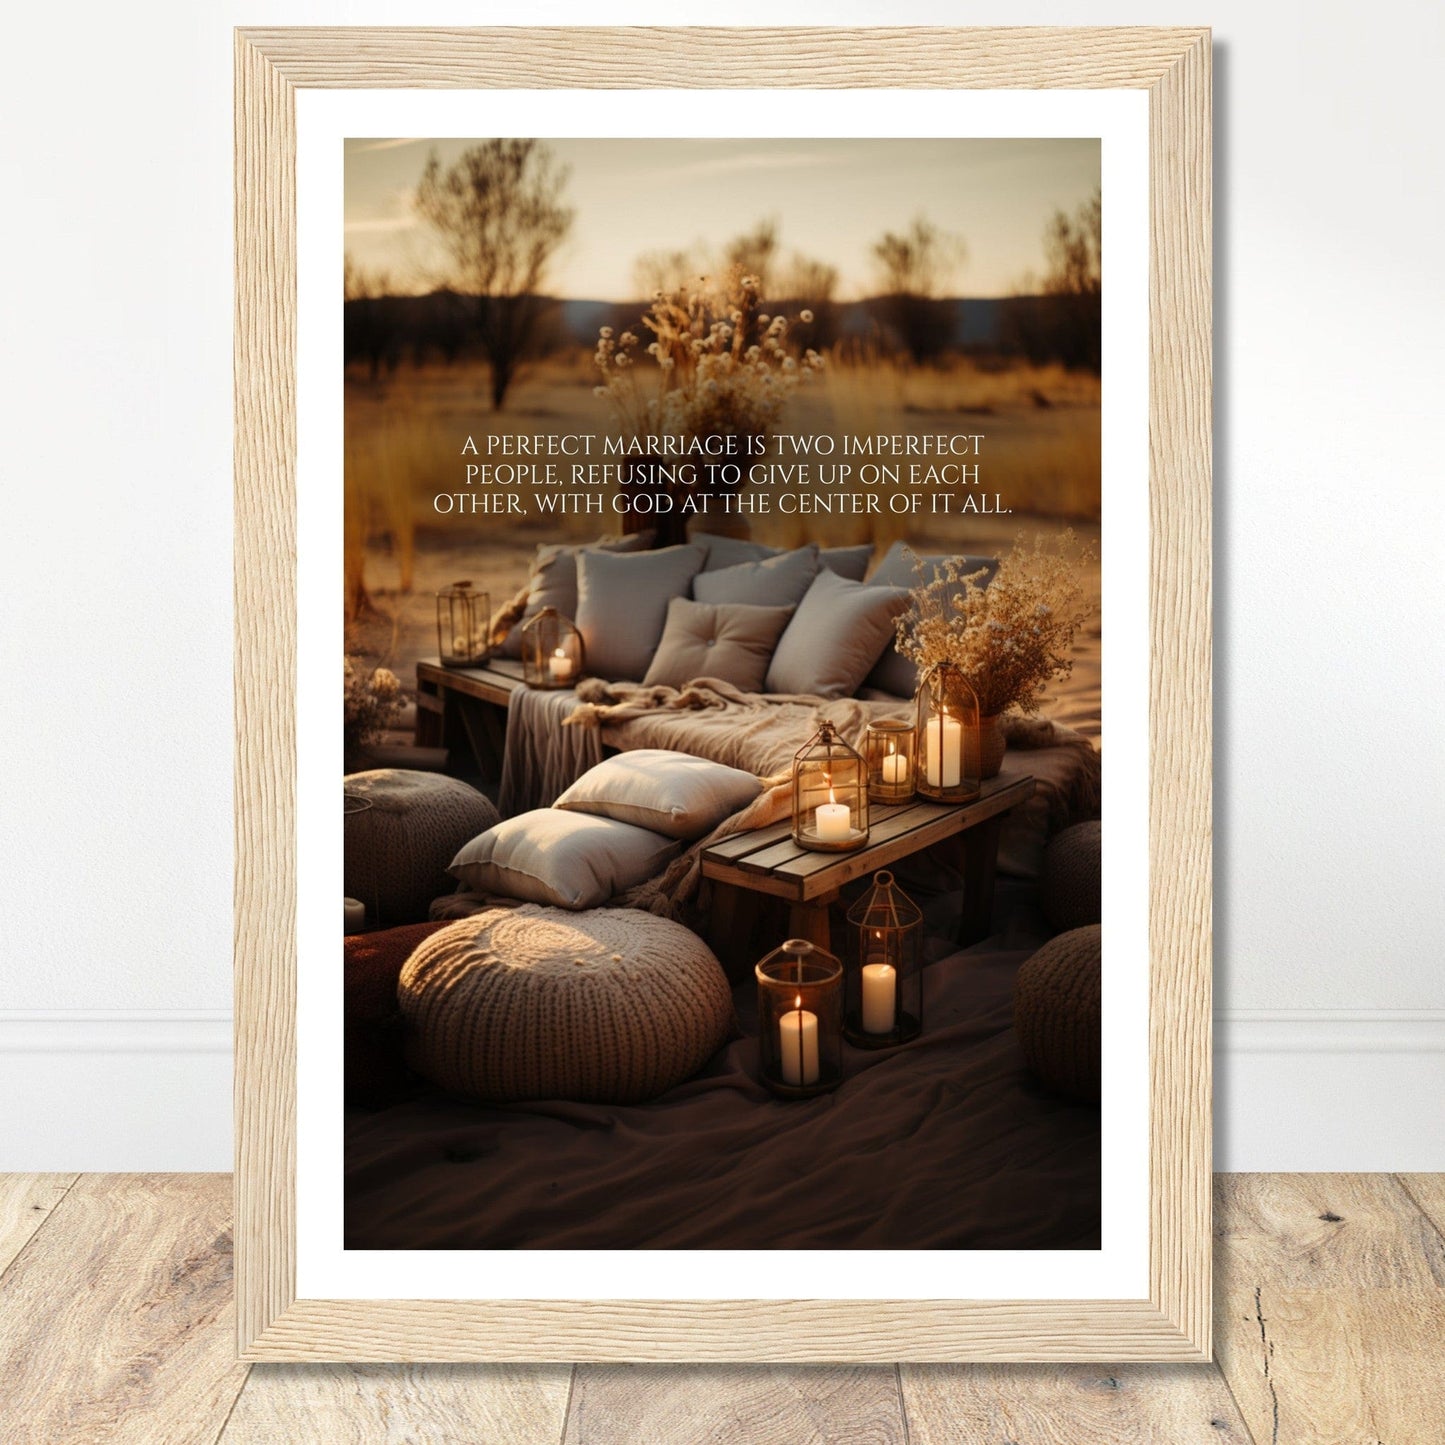 Coffee With My Father Print Material 21x29.7 cm / 8x12″ / Framed / Wood frame God-Centered Marriage - Custom Art